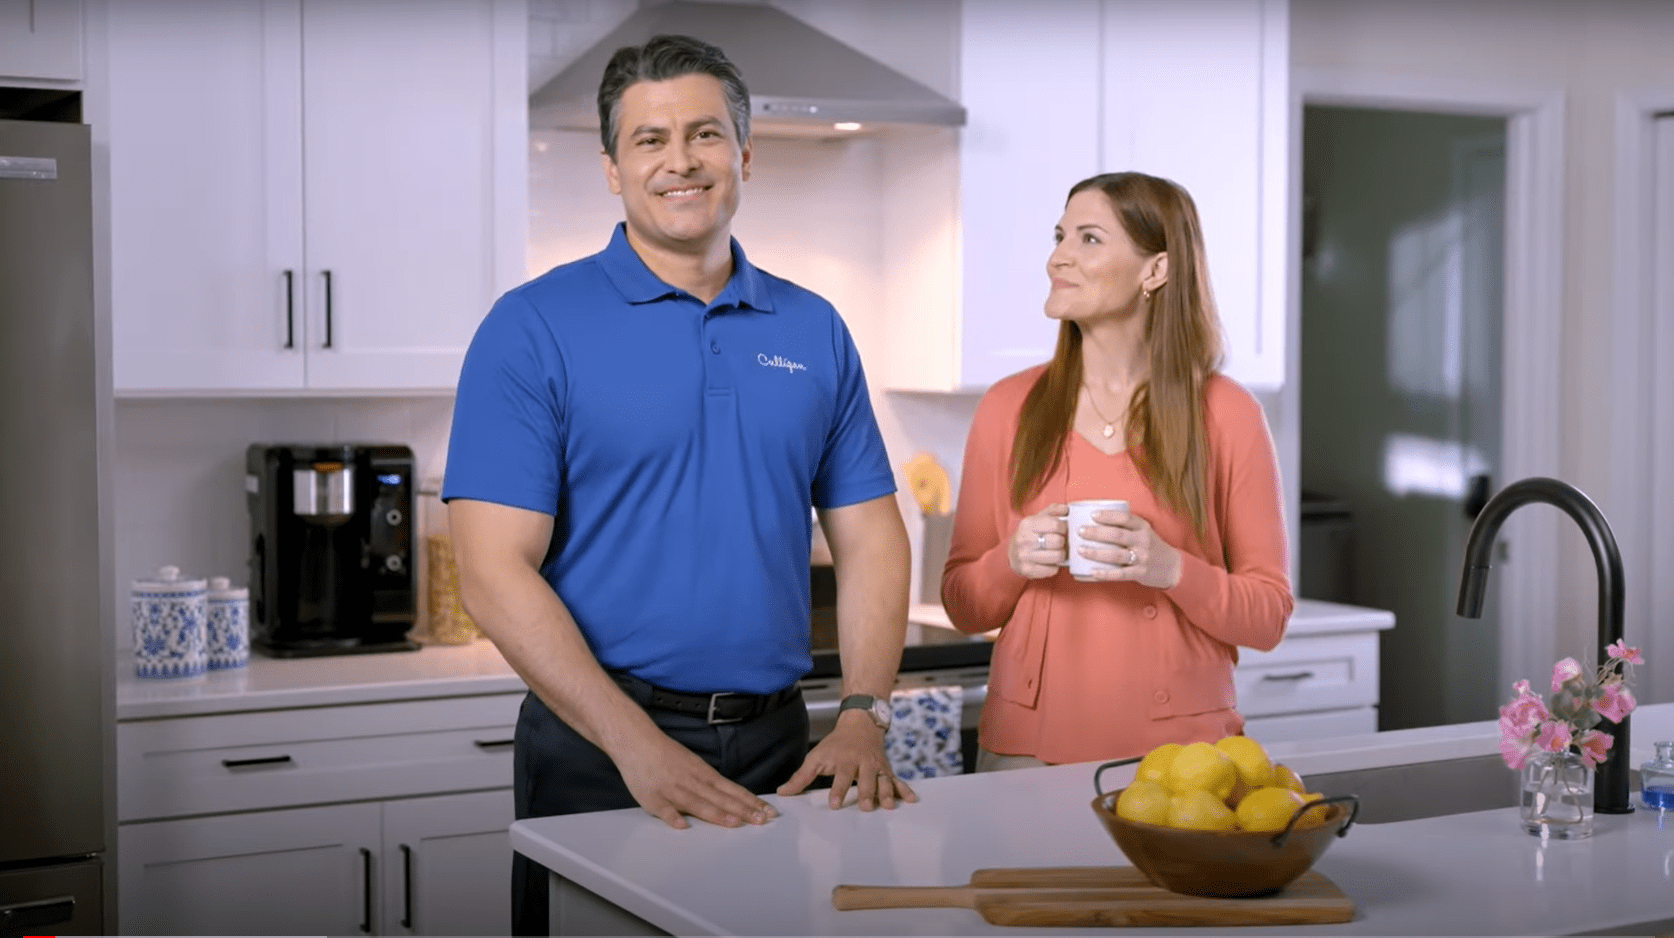 Culligan expert talks to homeowner about well water